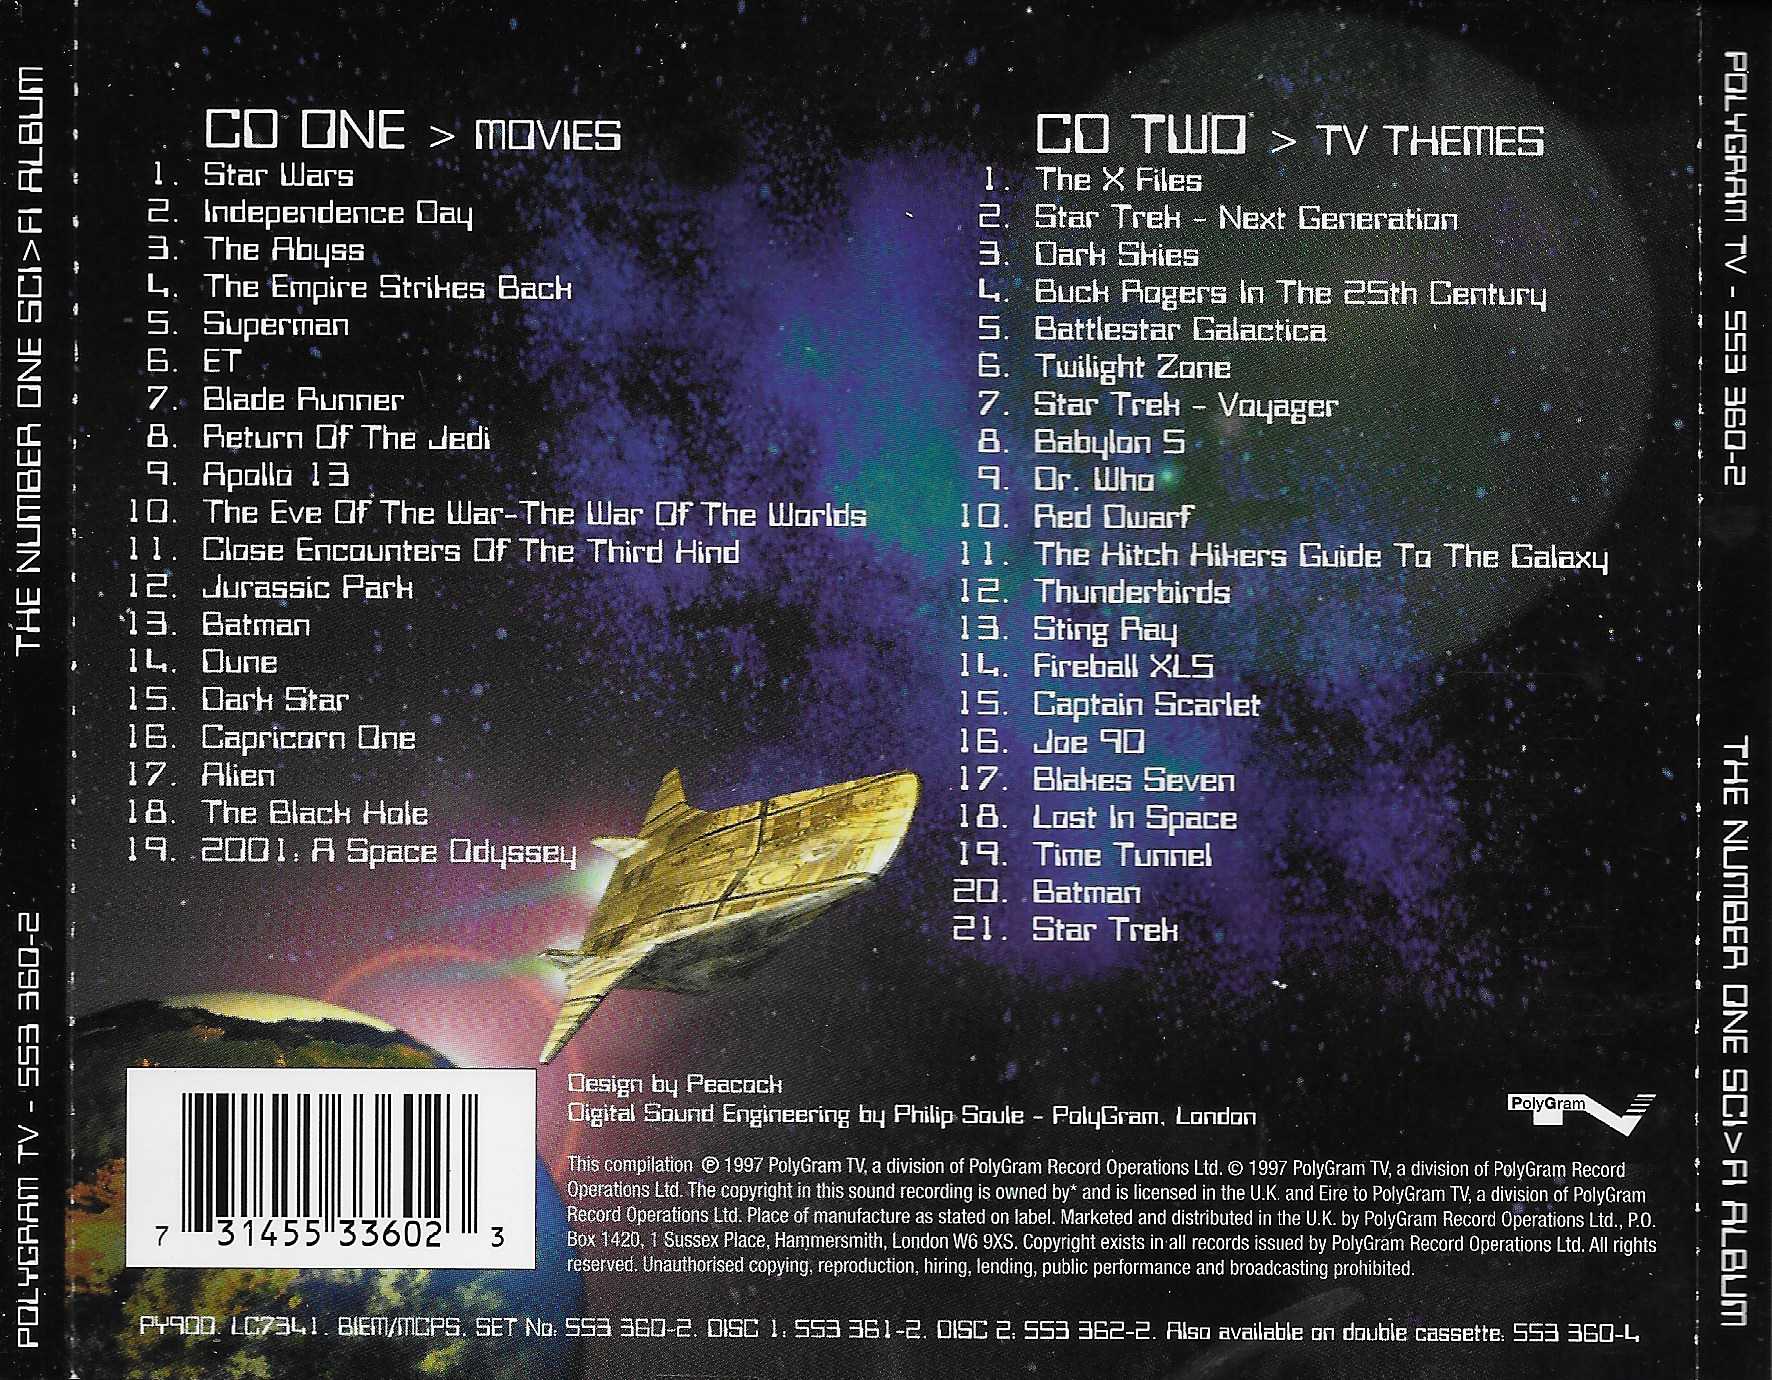 Picture of 553360 - 2 Sci > fi album (The no. 1) by artist Various from ITV, Channel 4 and Channel 5 library